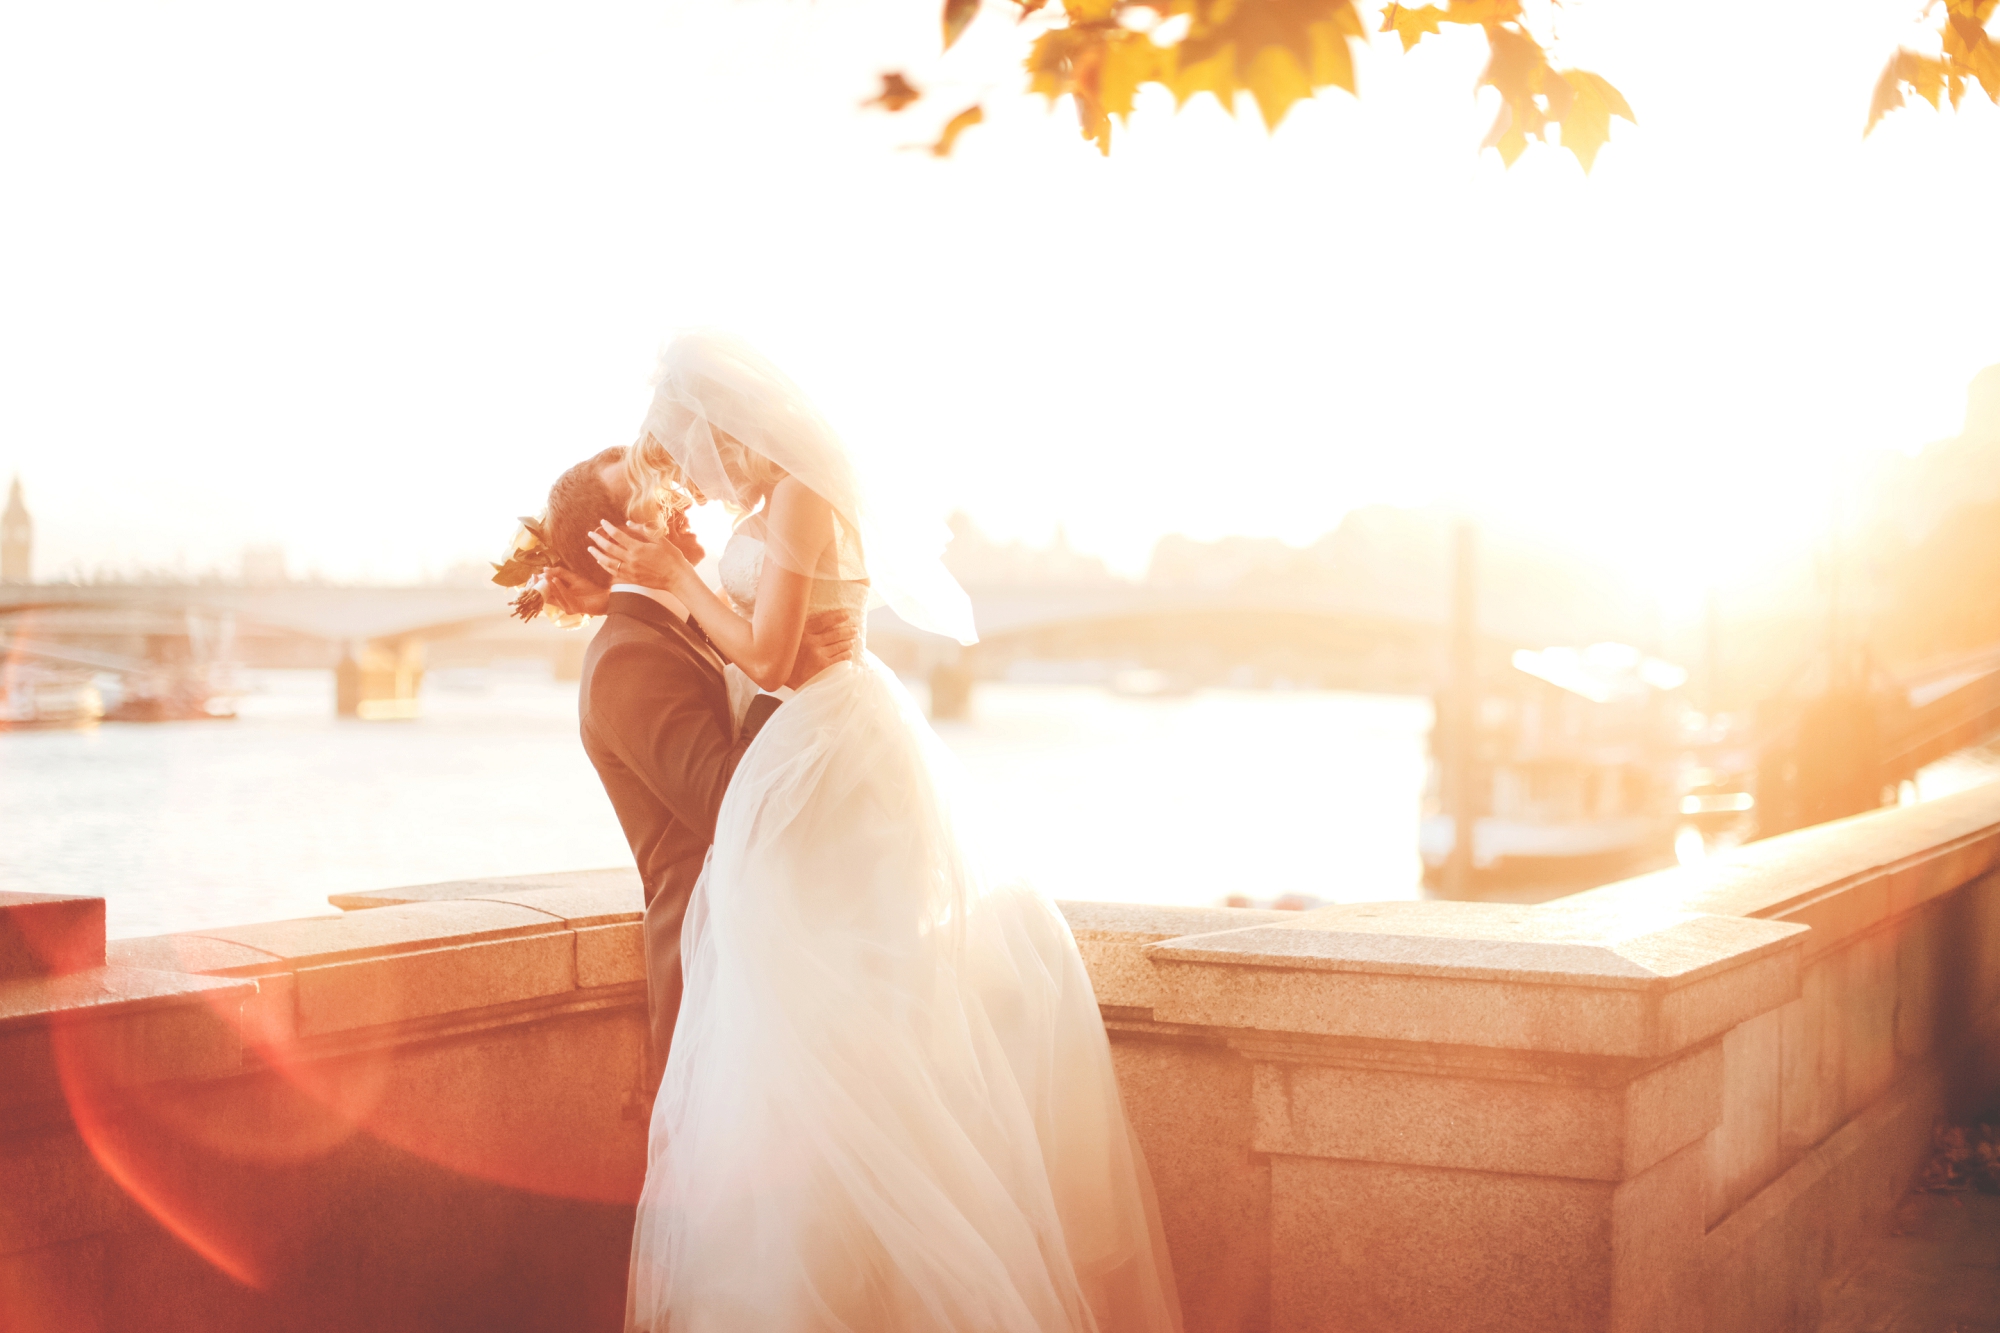 How to Get the Best Wedding Photos